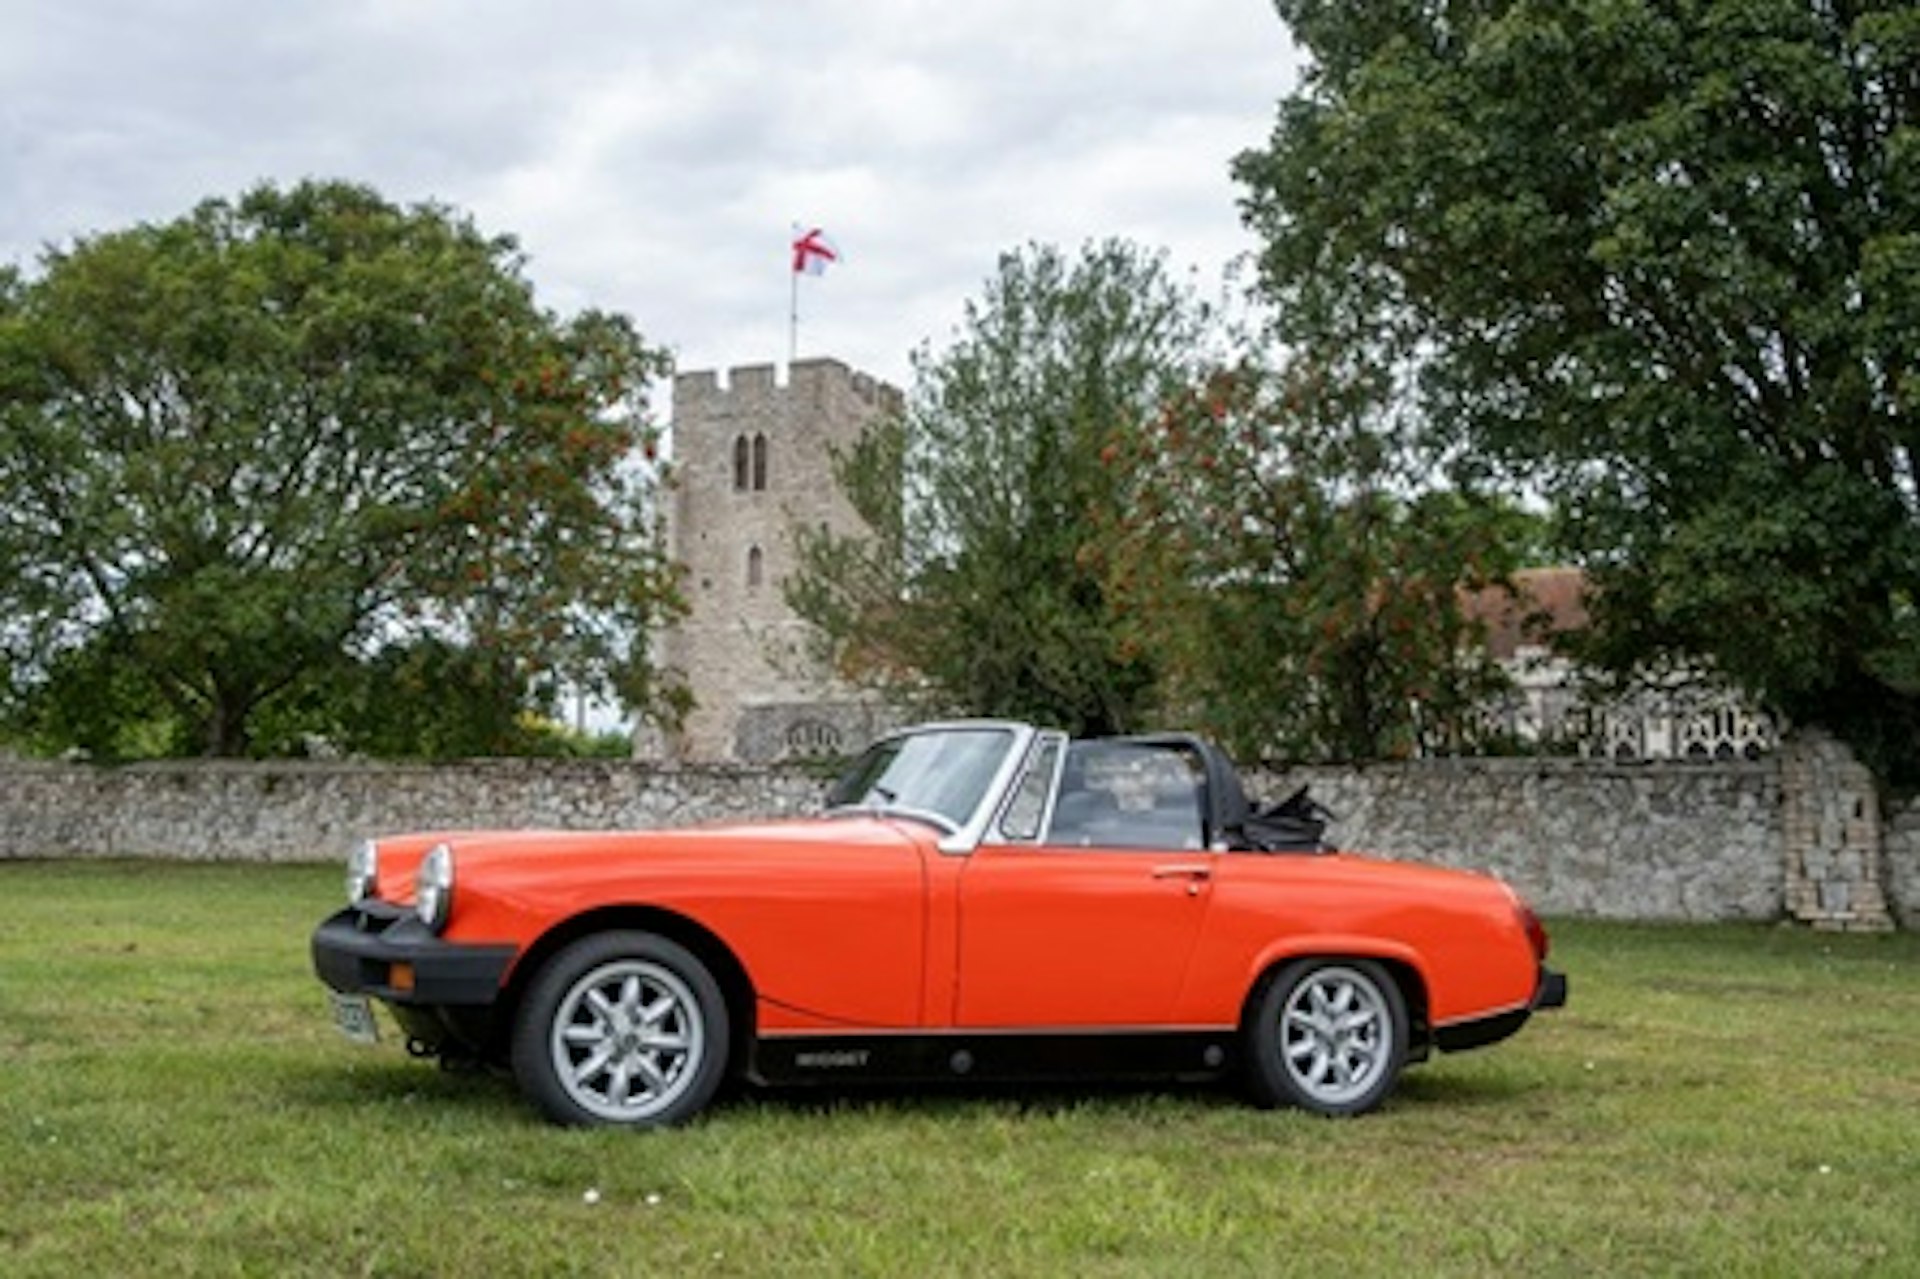 MG Midget Classic Car On Road Driving Experience - Weekday 1